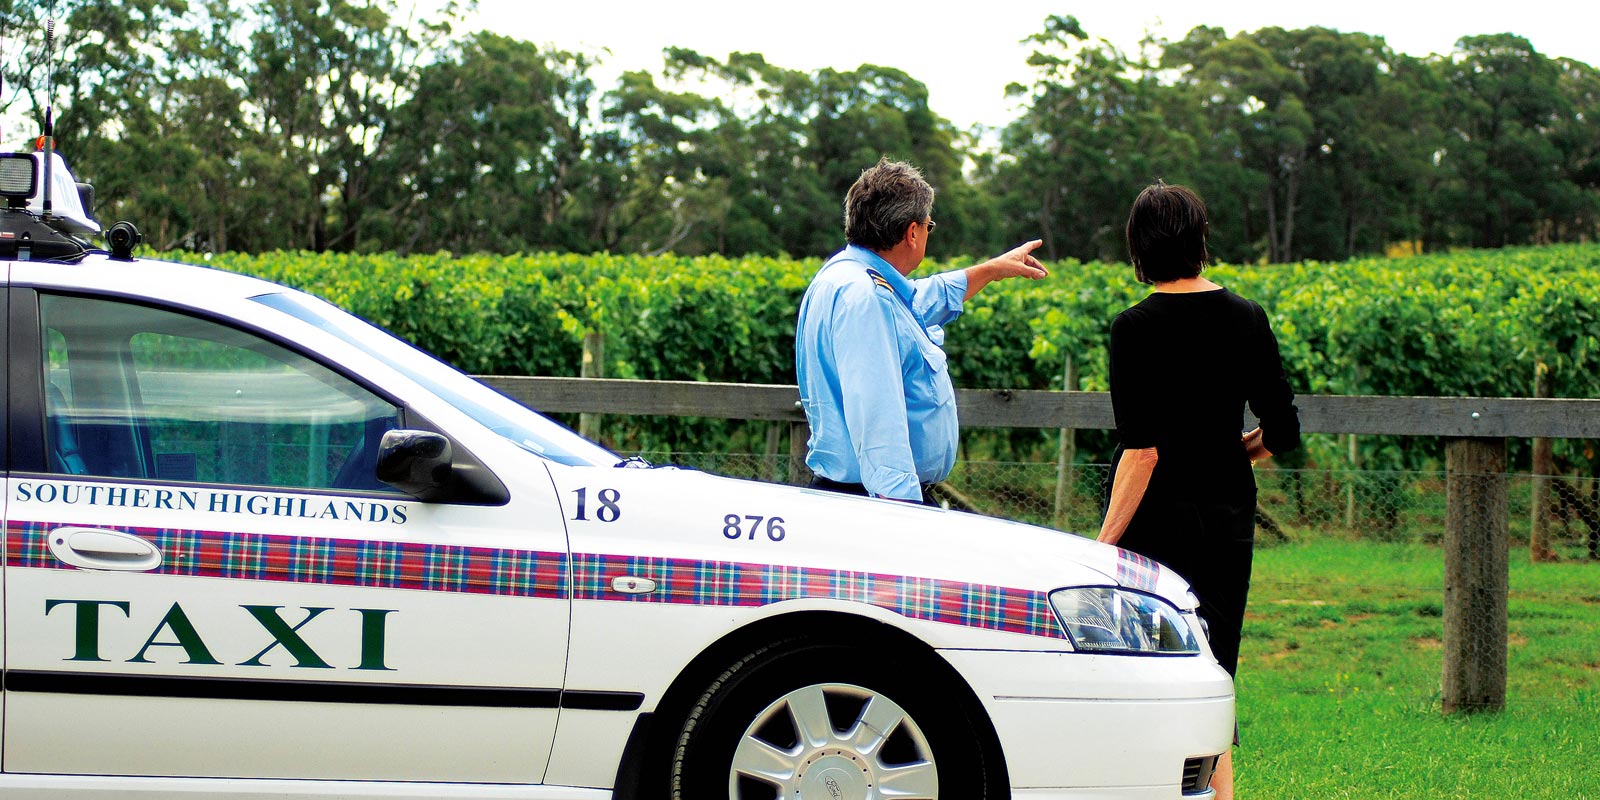 Taxi winery